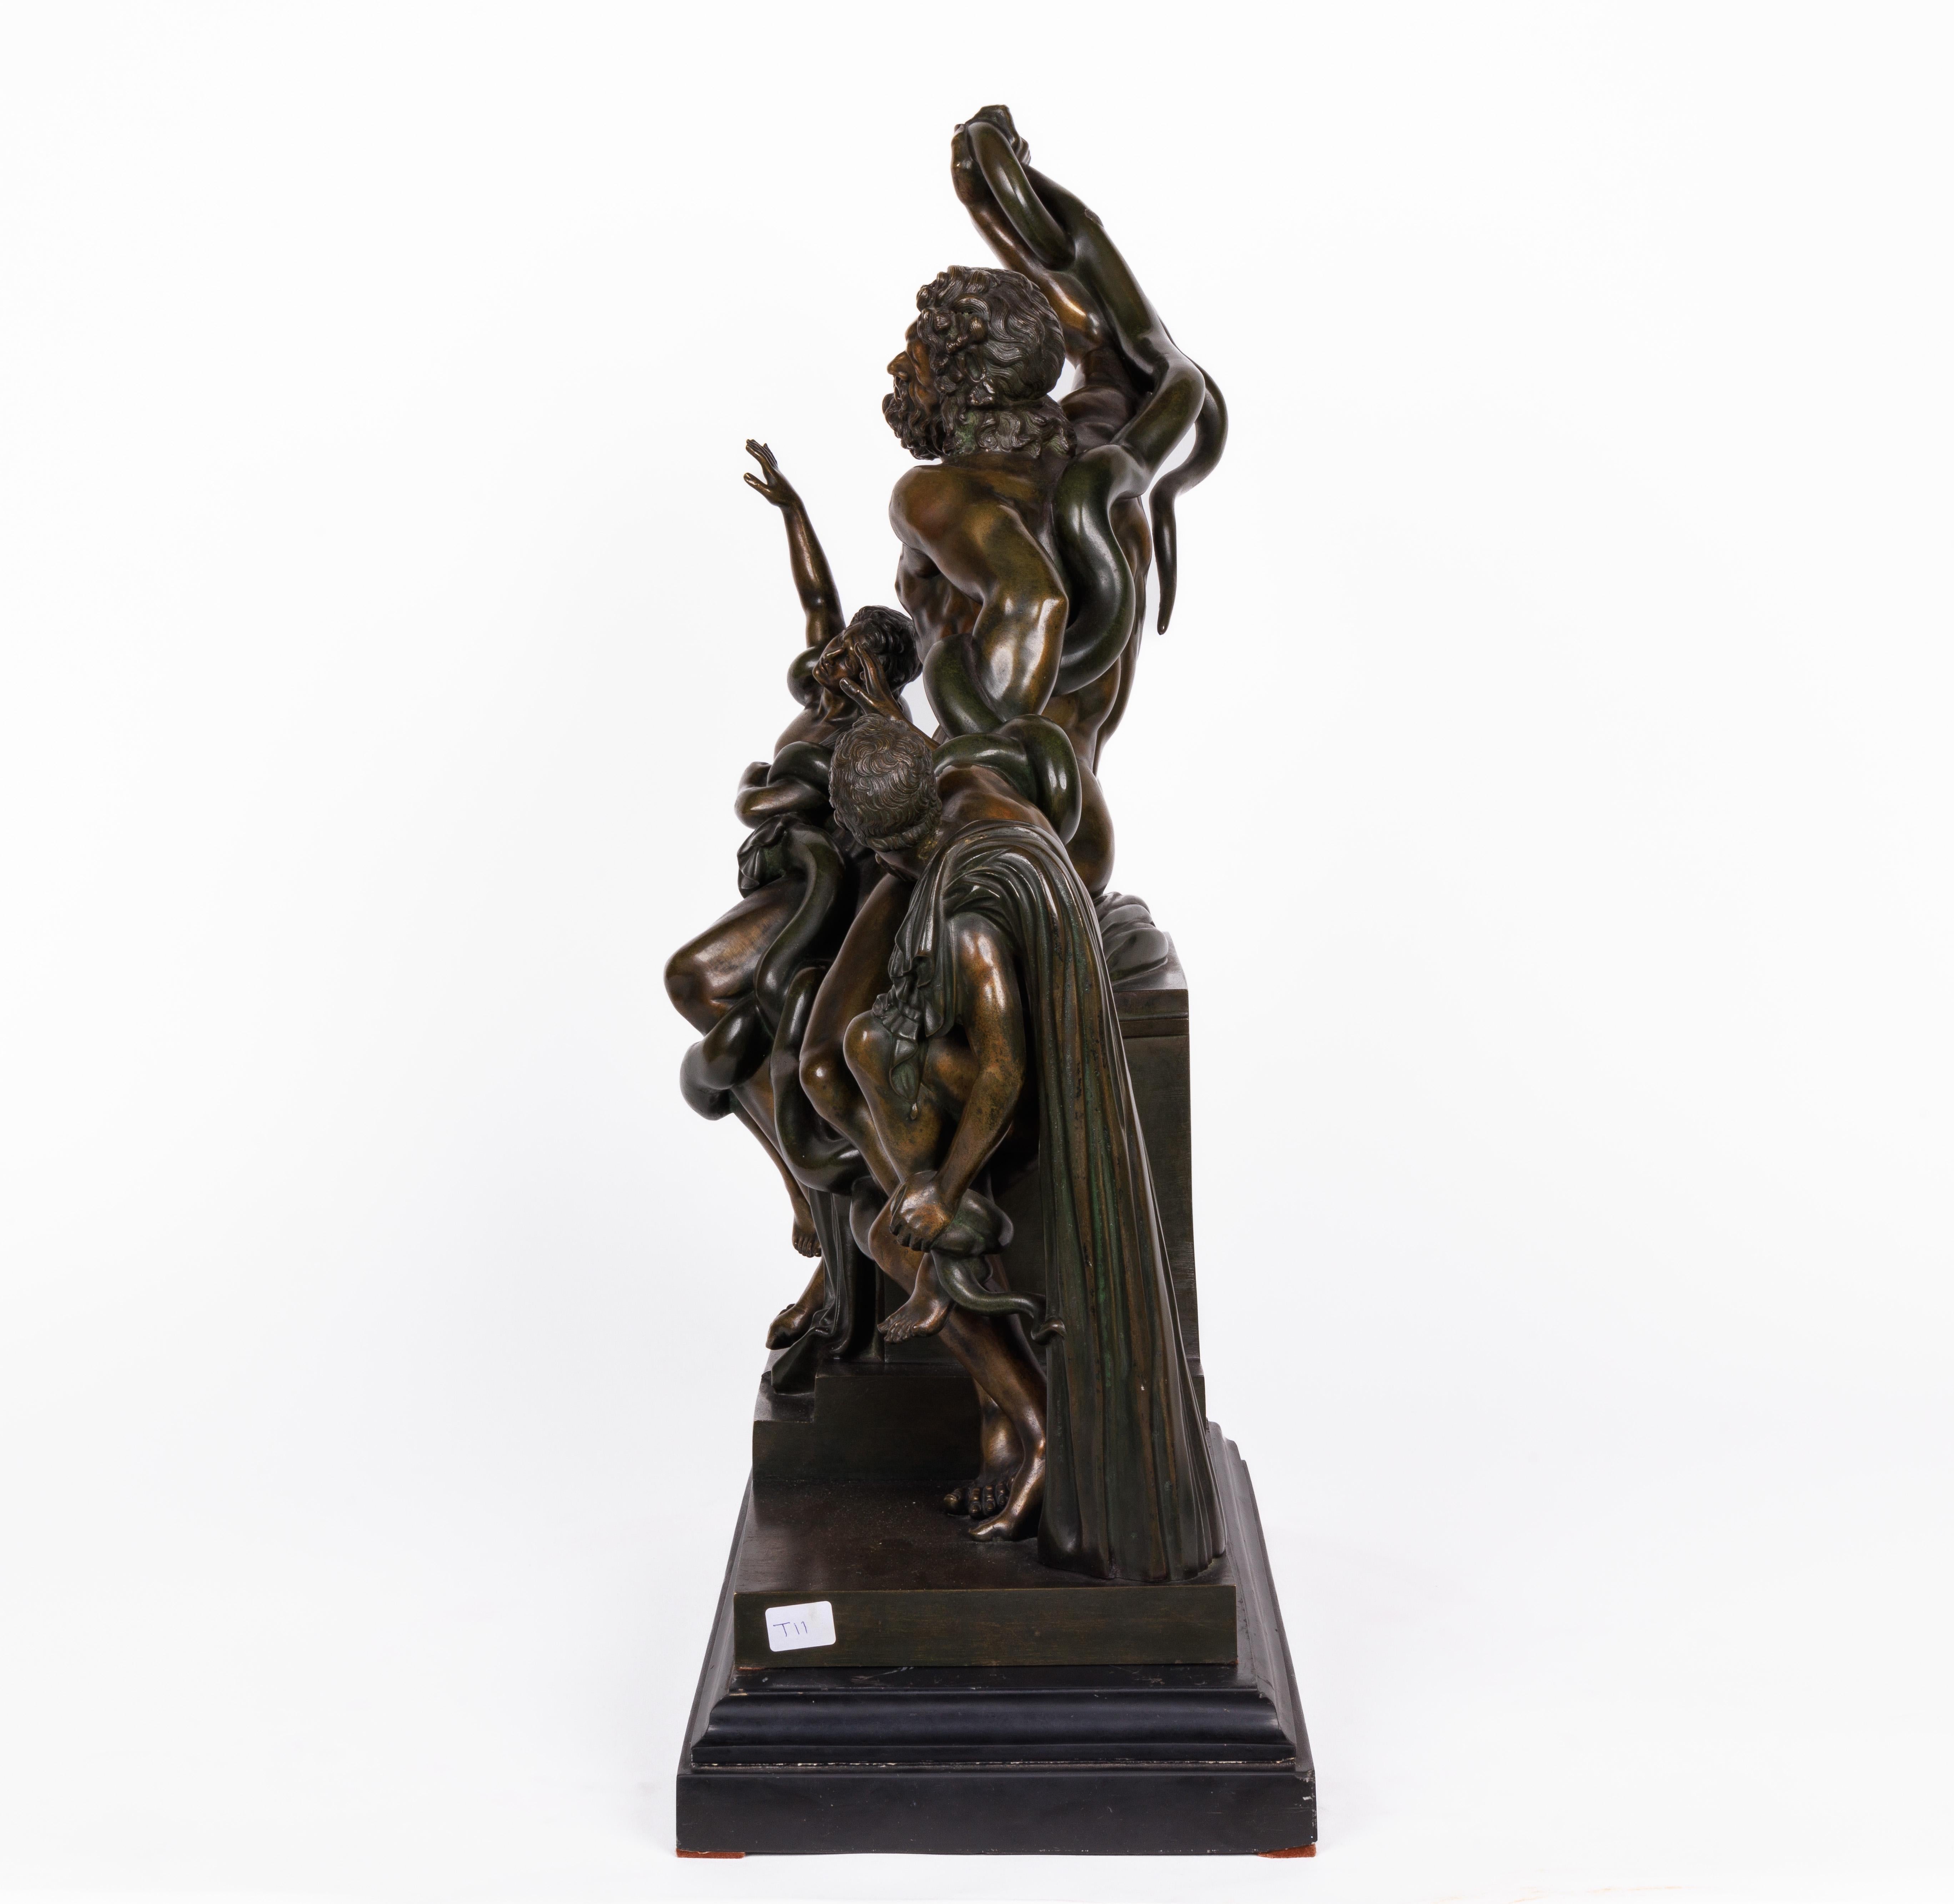 An Italian grand tour patinated bronze group sculpture of Laocoon and his sons, After the antique by Agesander of Rhodes, C. 1870

Very nice quality sculpture, sitting on a black slate base. We did not find any marks on this sculpture.

Good